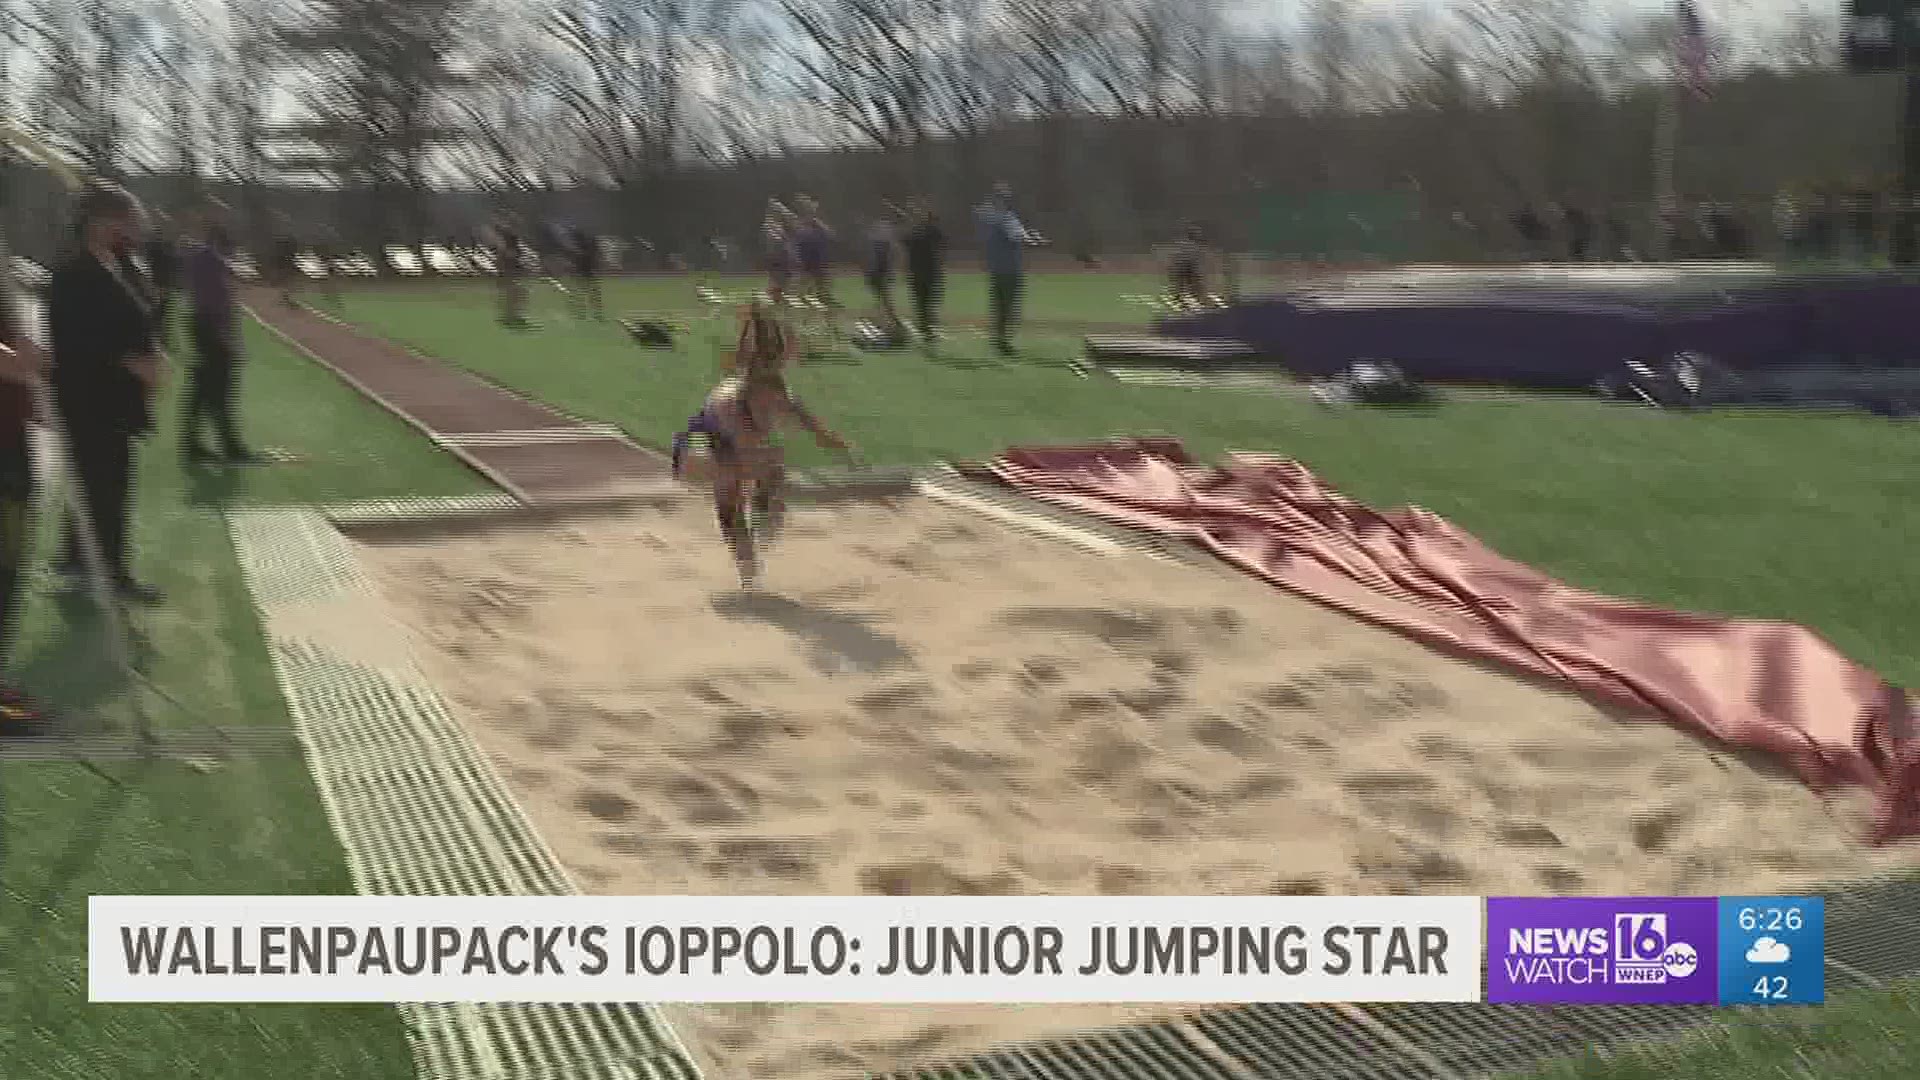 Wallenpaupack's Ioppolo: A Junior Jumping Star